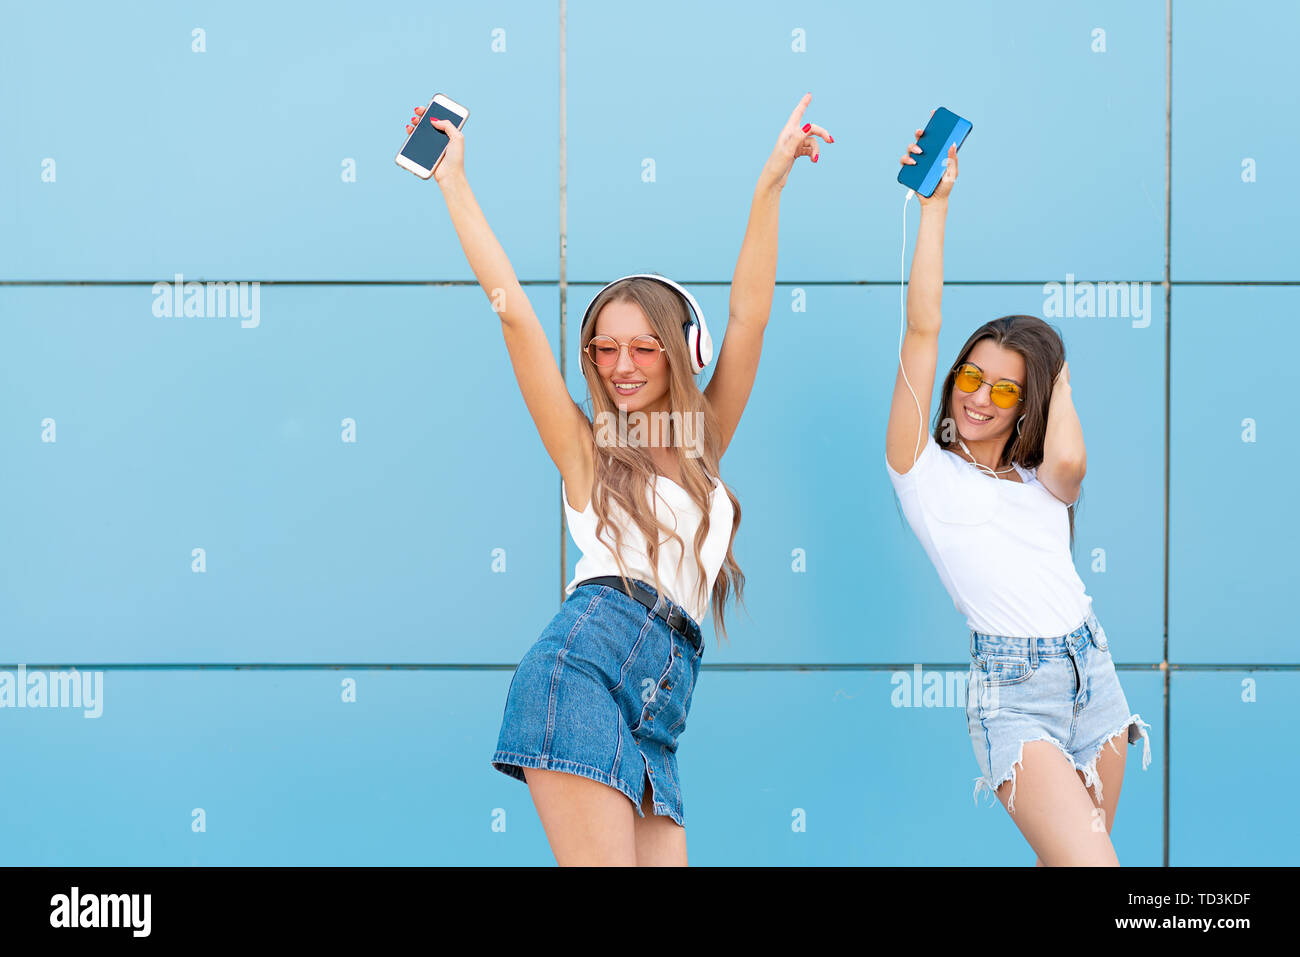 Fashion portrait of two pretty smiling hipsters woman in sunglasses holding smartphone and dancing against the colorful blue wall Stock Photo